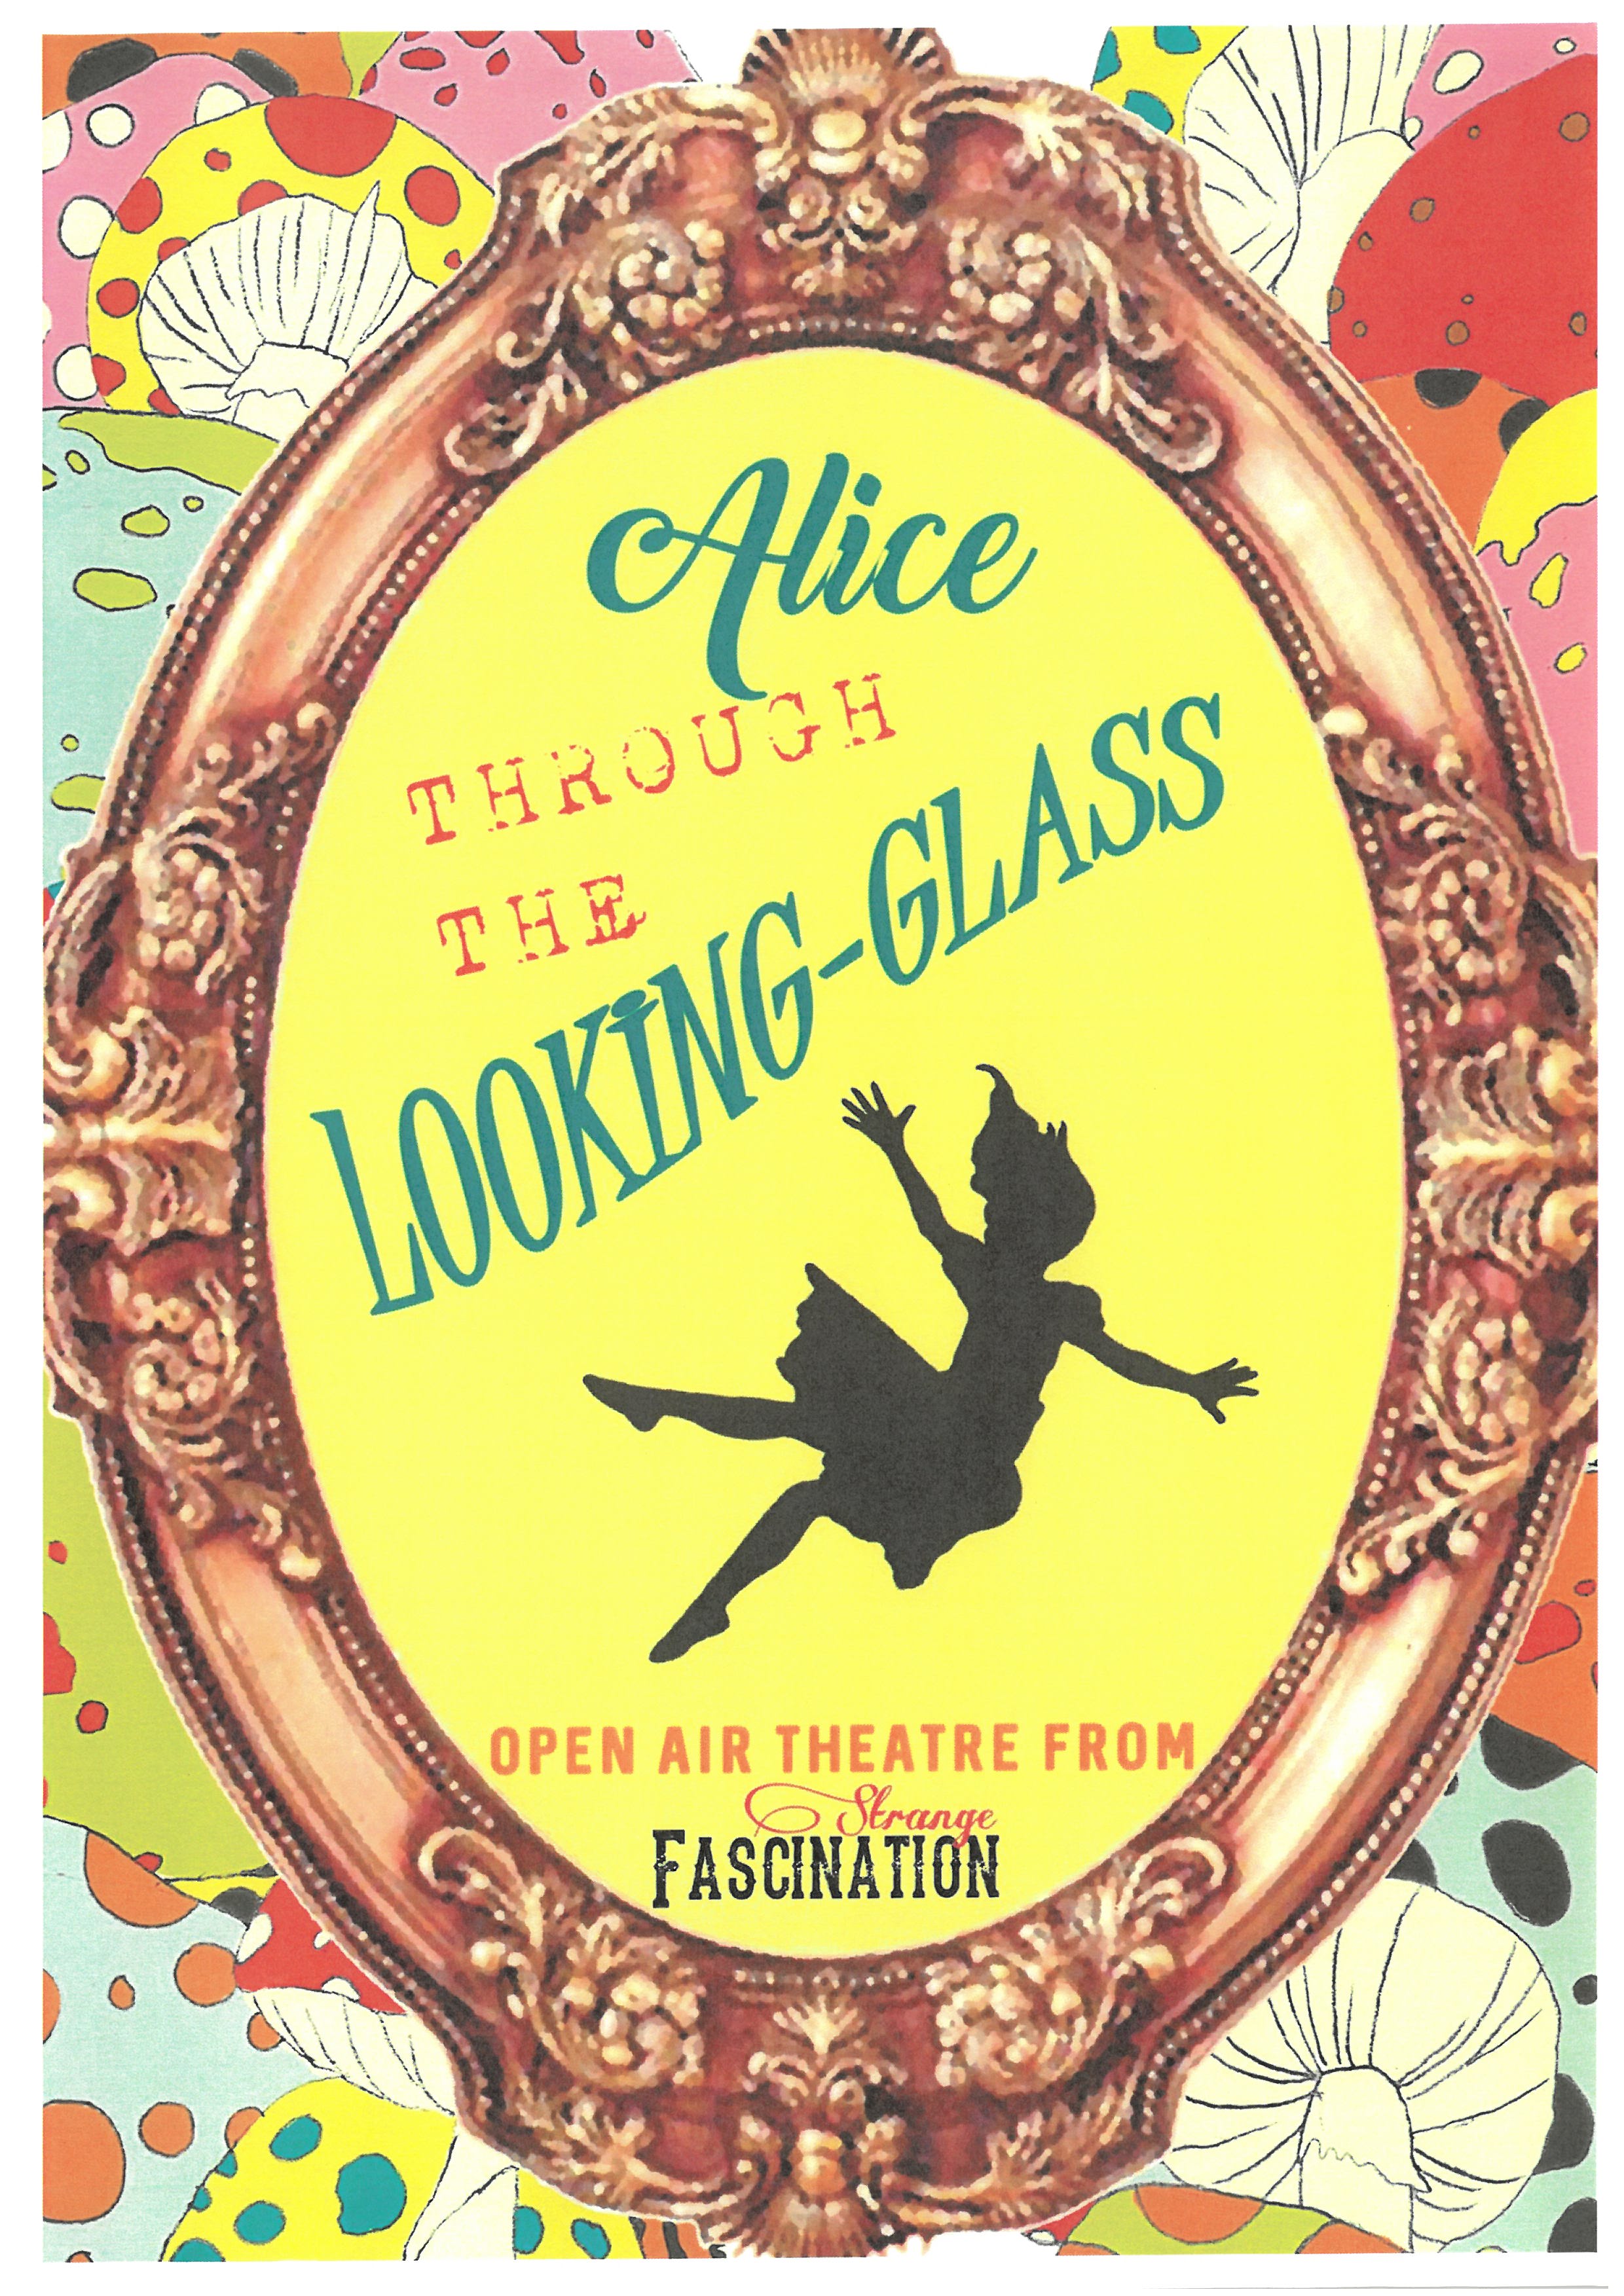 Coming in 2023 - Alice Through The Looking Glass